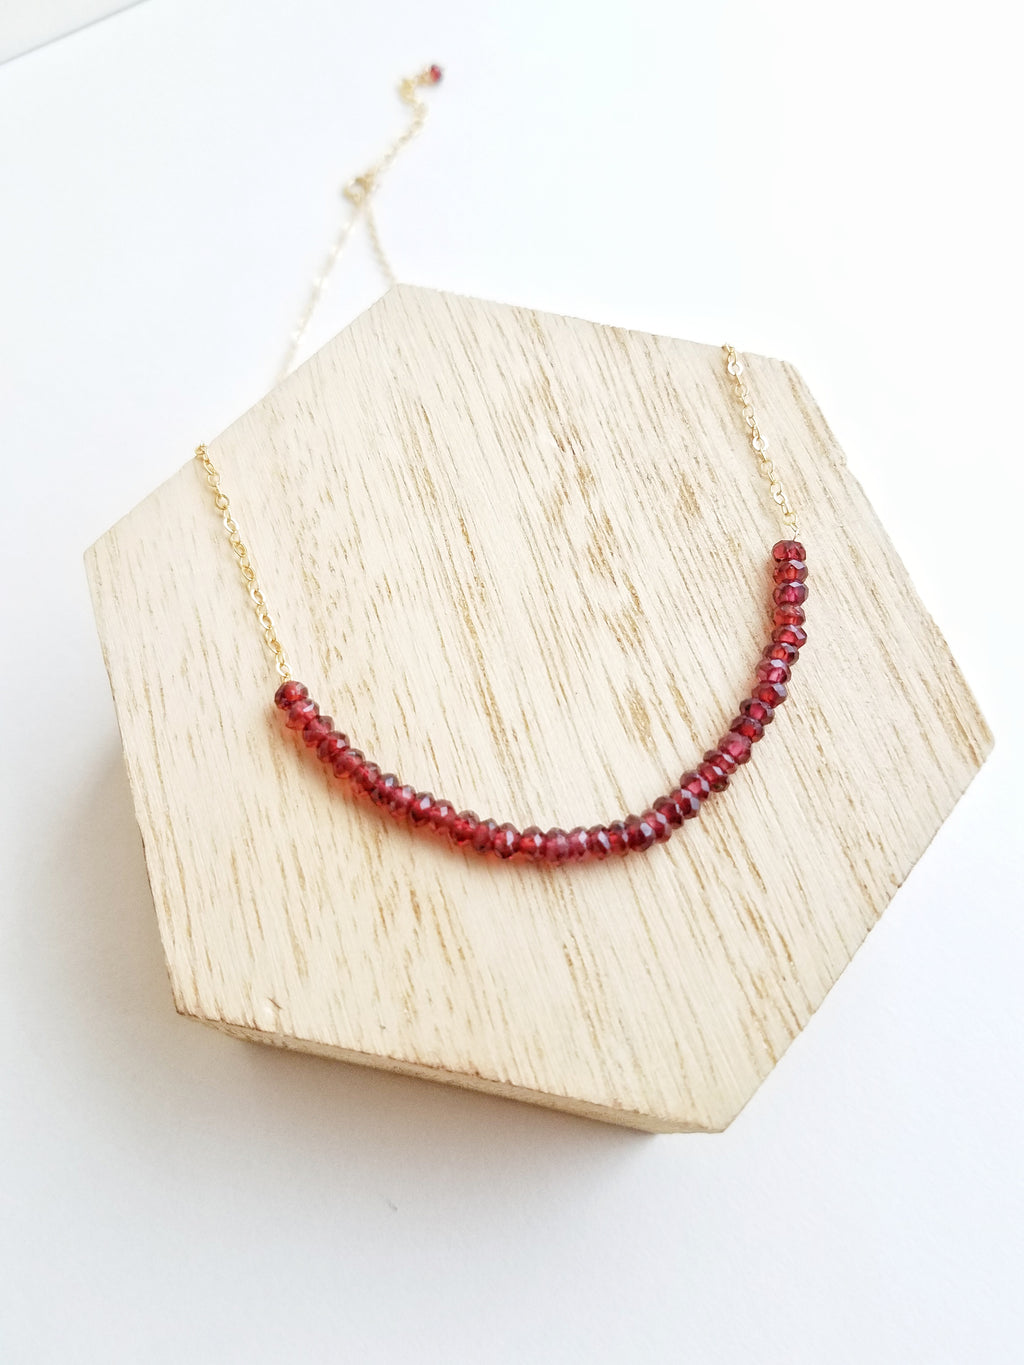 Garnet necklace, collar length, gold filled chain, faceted roundels, handcrafted, designed by Billie Lorraine  